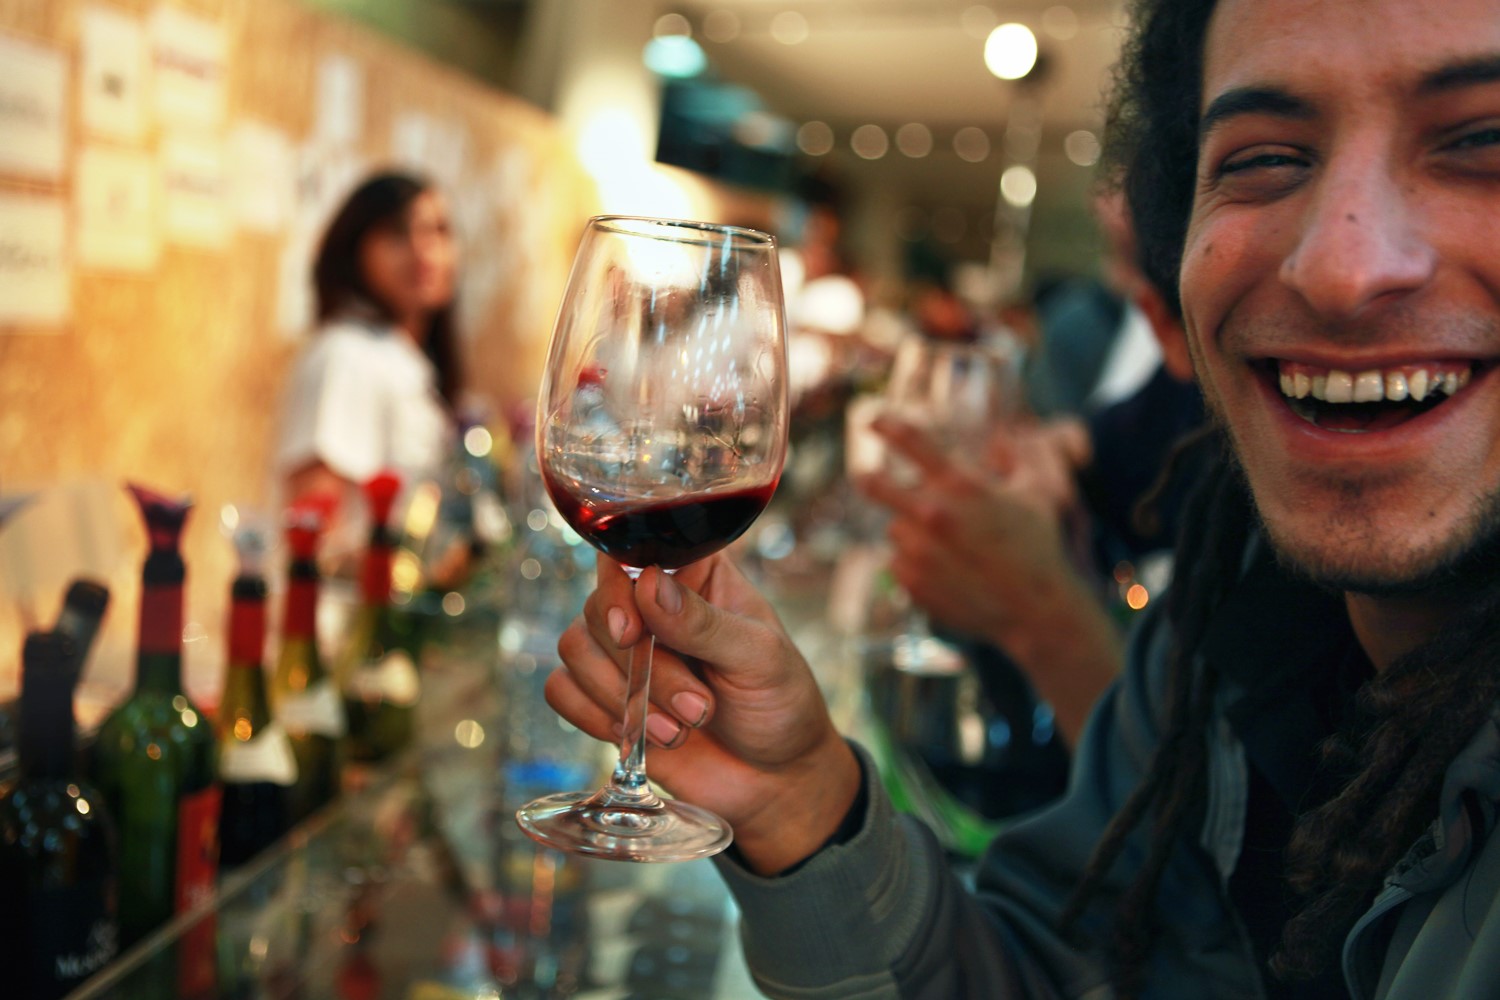 Tel Aviv's wine bars are . Image by David Silverman/Getty Images Europe